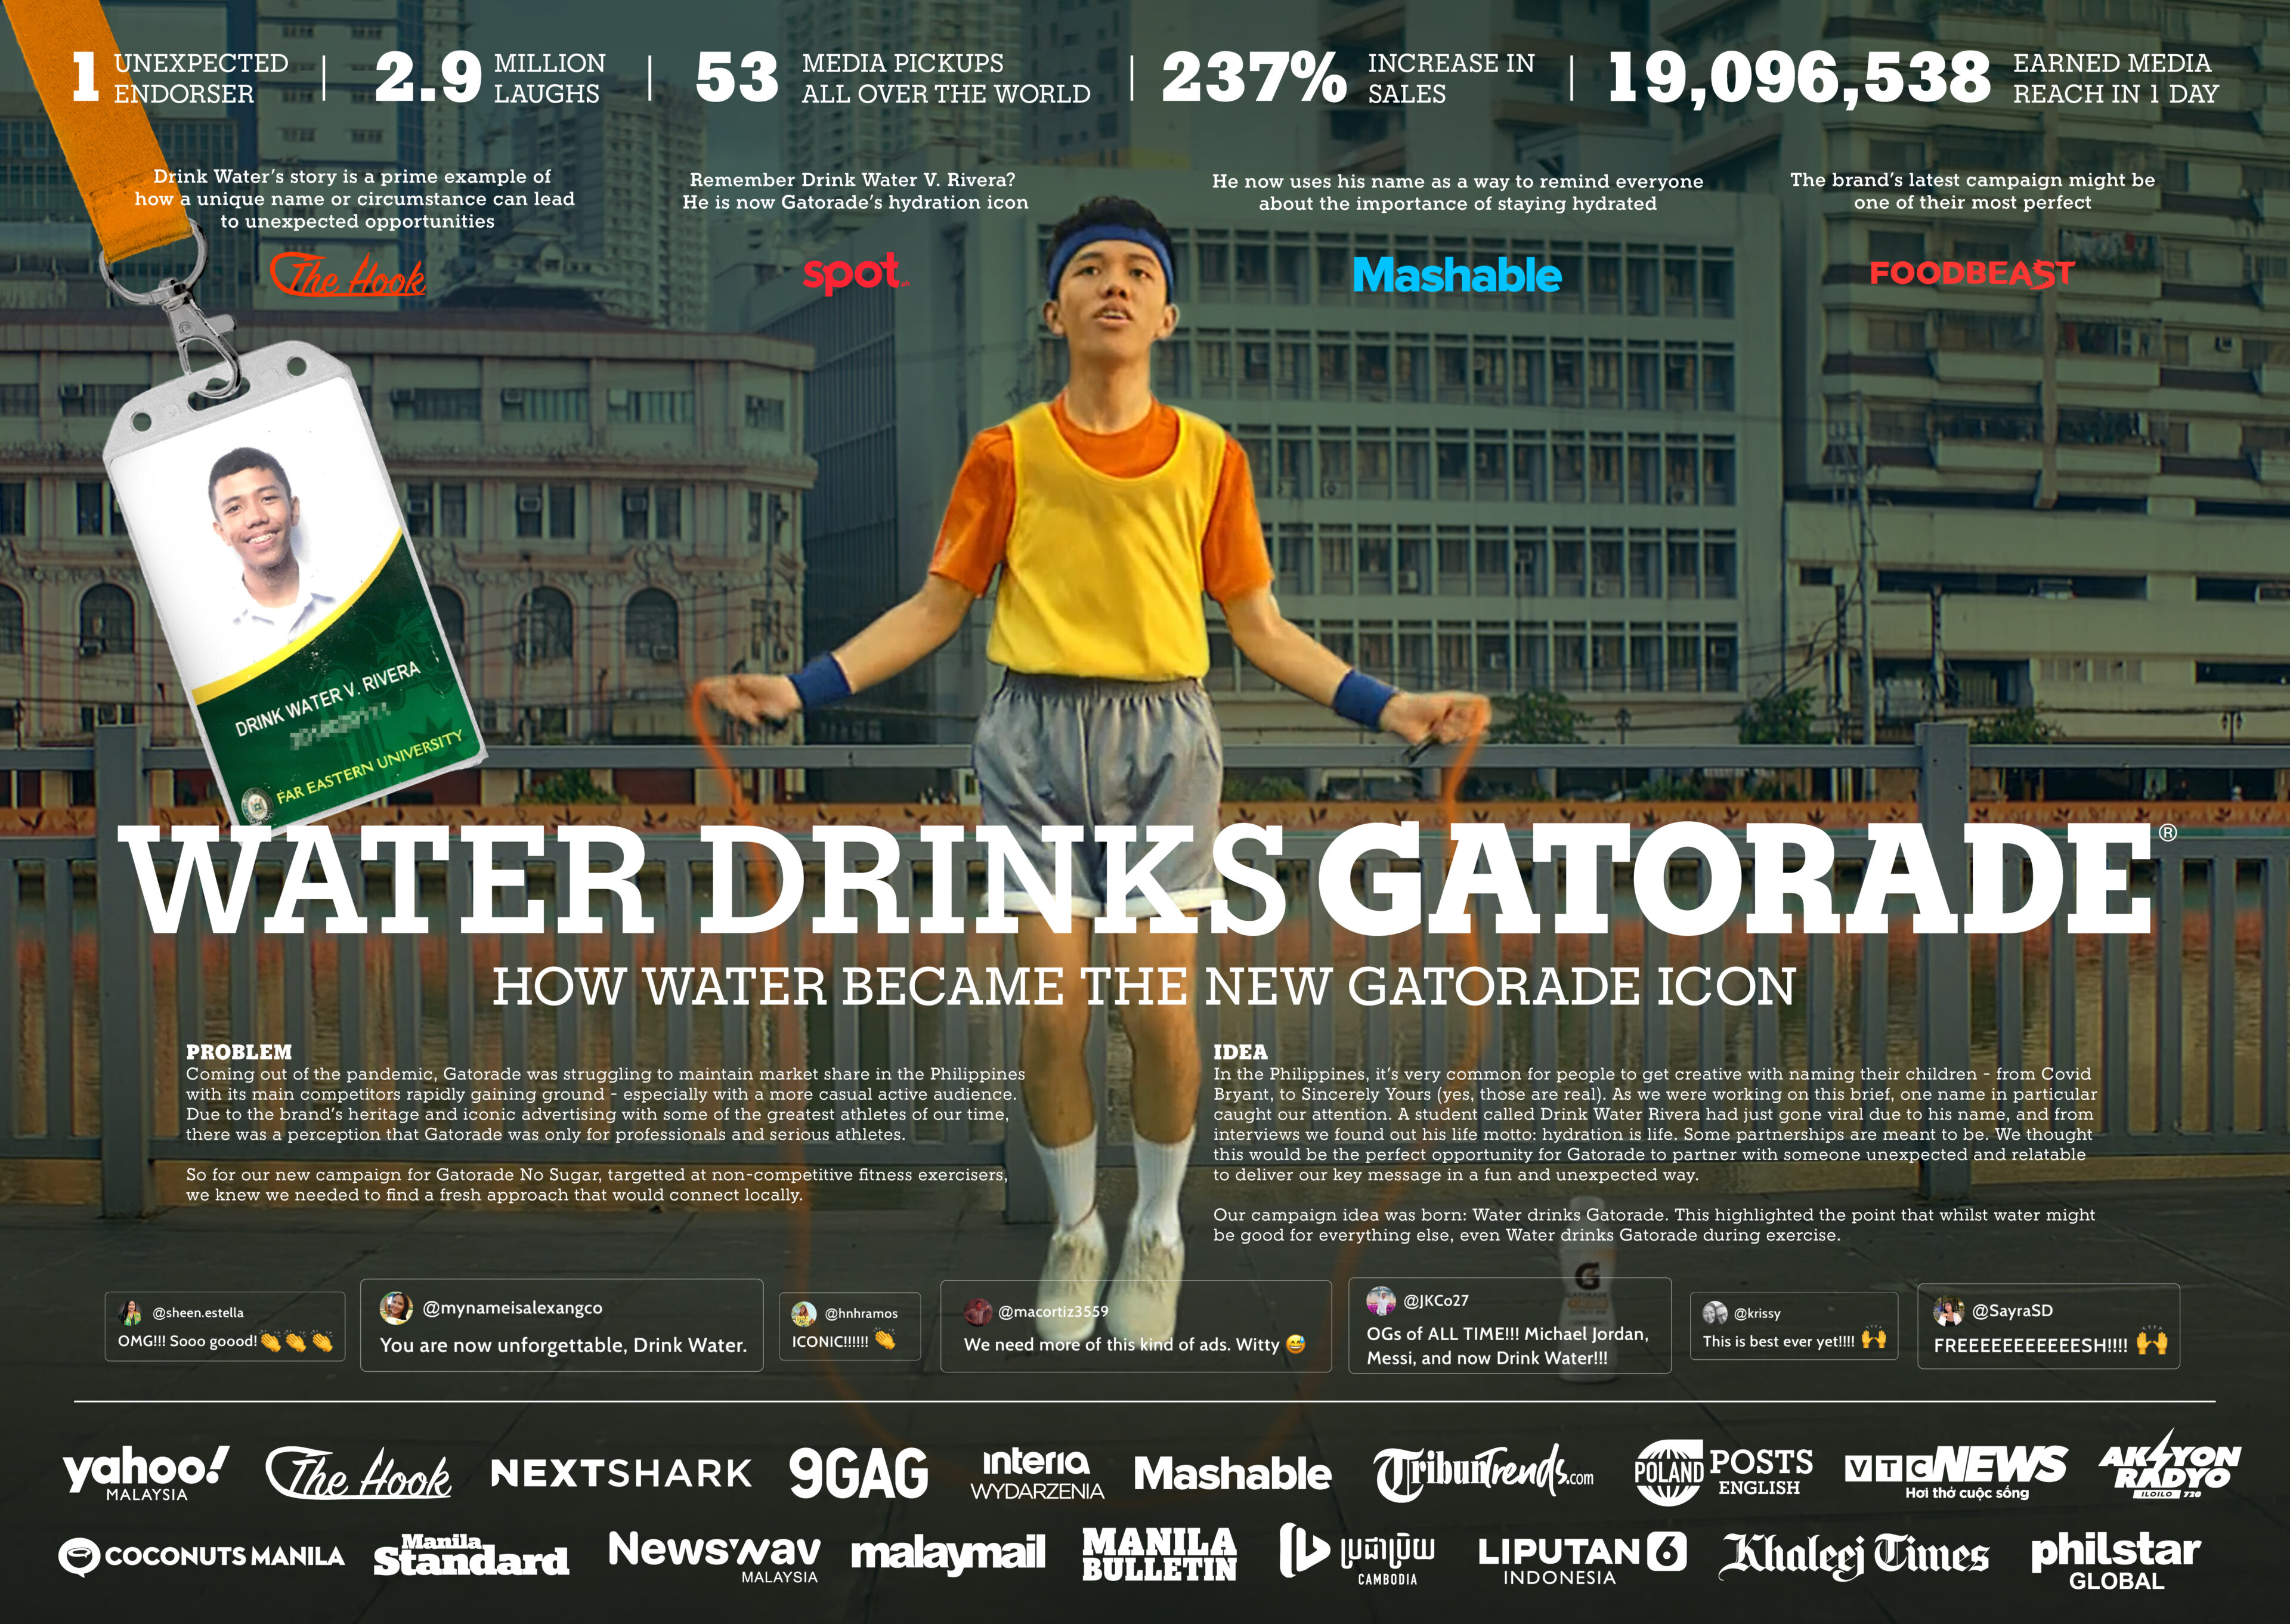 Case study board for the "Water Drinks Gatorade" work, featuring the influencer 'Drink Water'